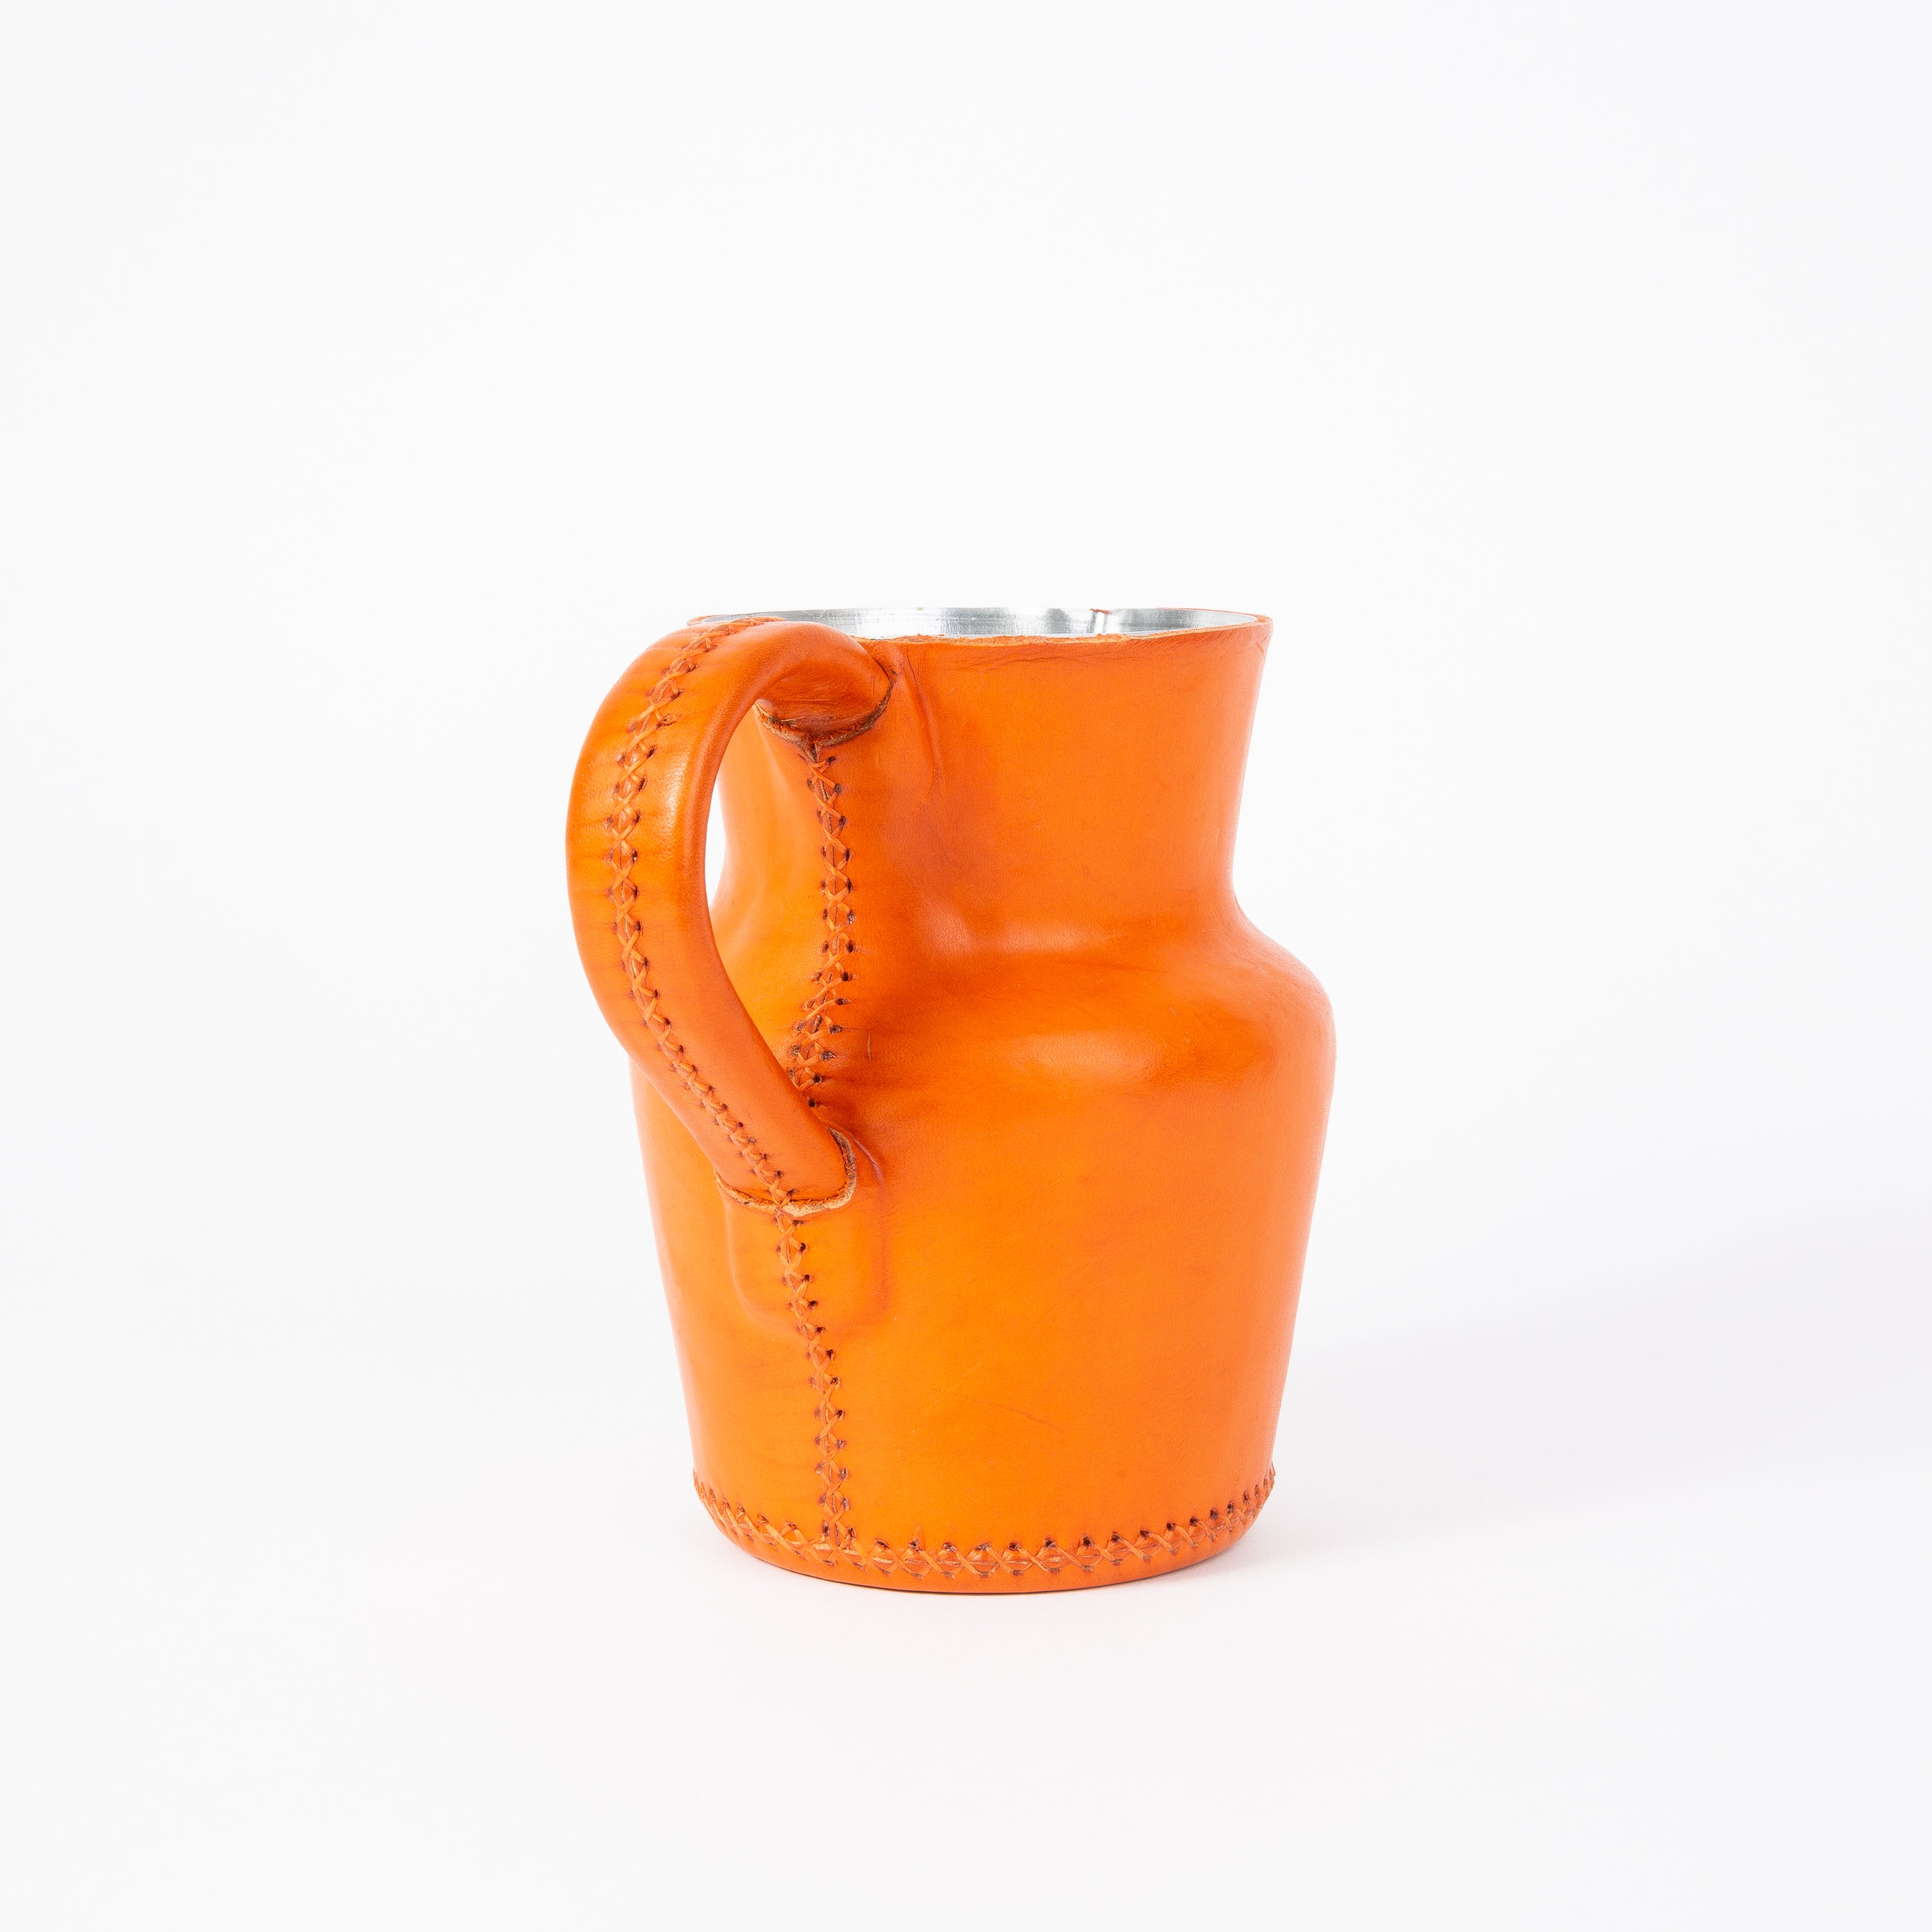 Orange Leather Carafe | Leather Pitcher | Leather Vase | Leather Home Goods | Home Goods | Home and Garden | Interior Design | Leather Tablewares | Leather Barwares | Leather Accessories | Bati Leather Goods